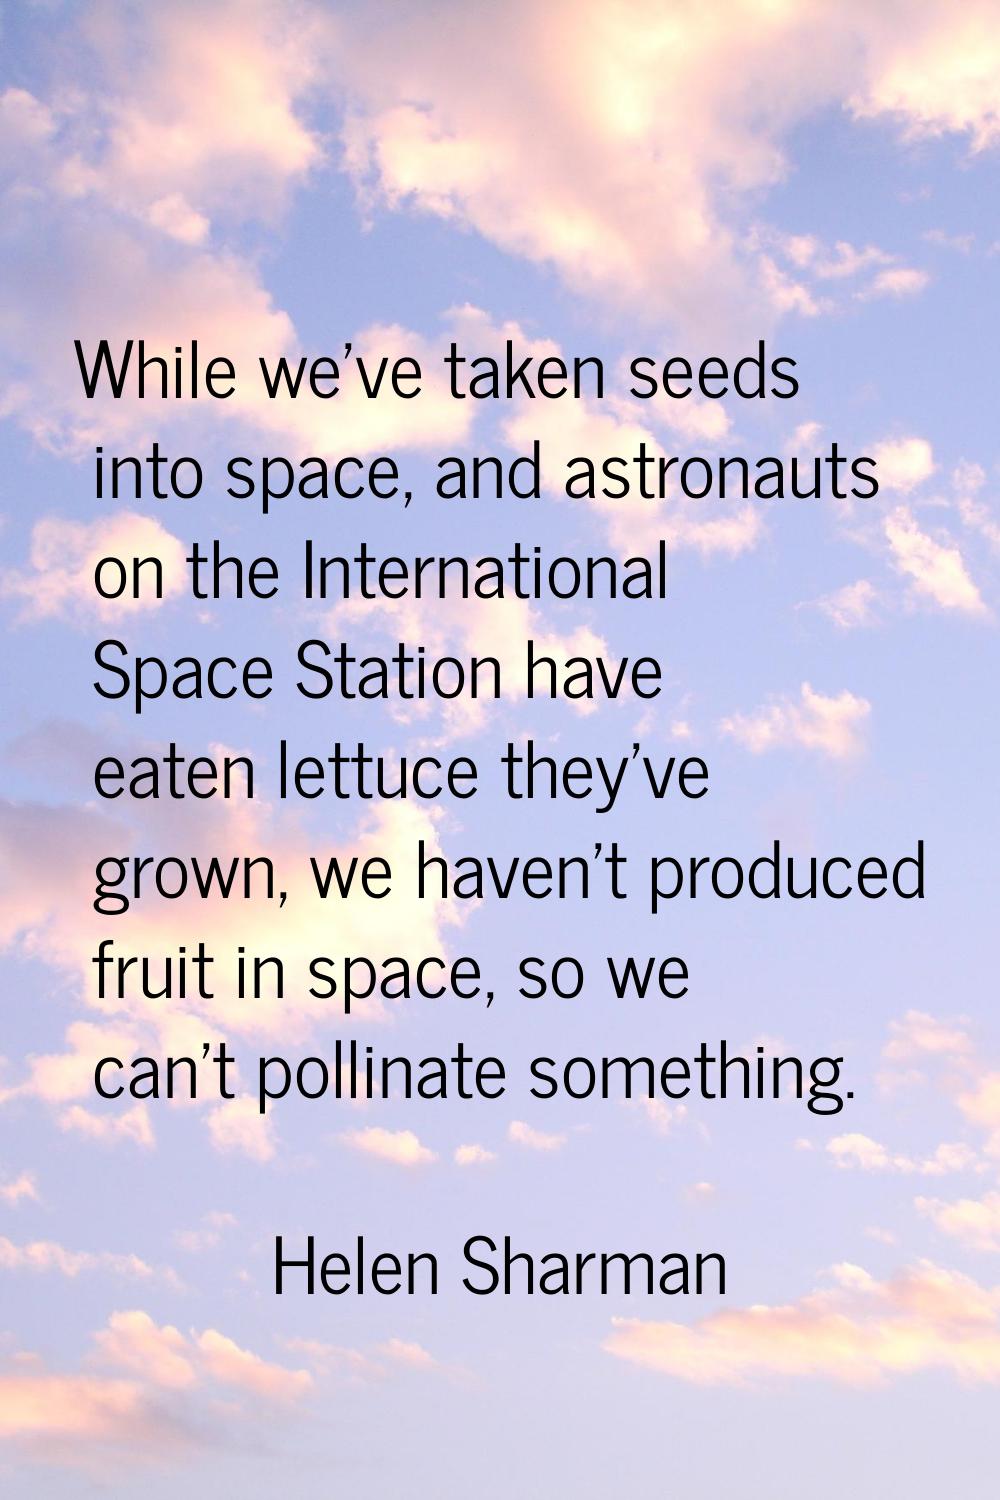 While we've taken seeds into space, and astronauts on the International Space Station have eaten le